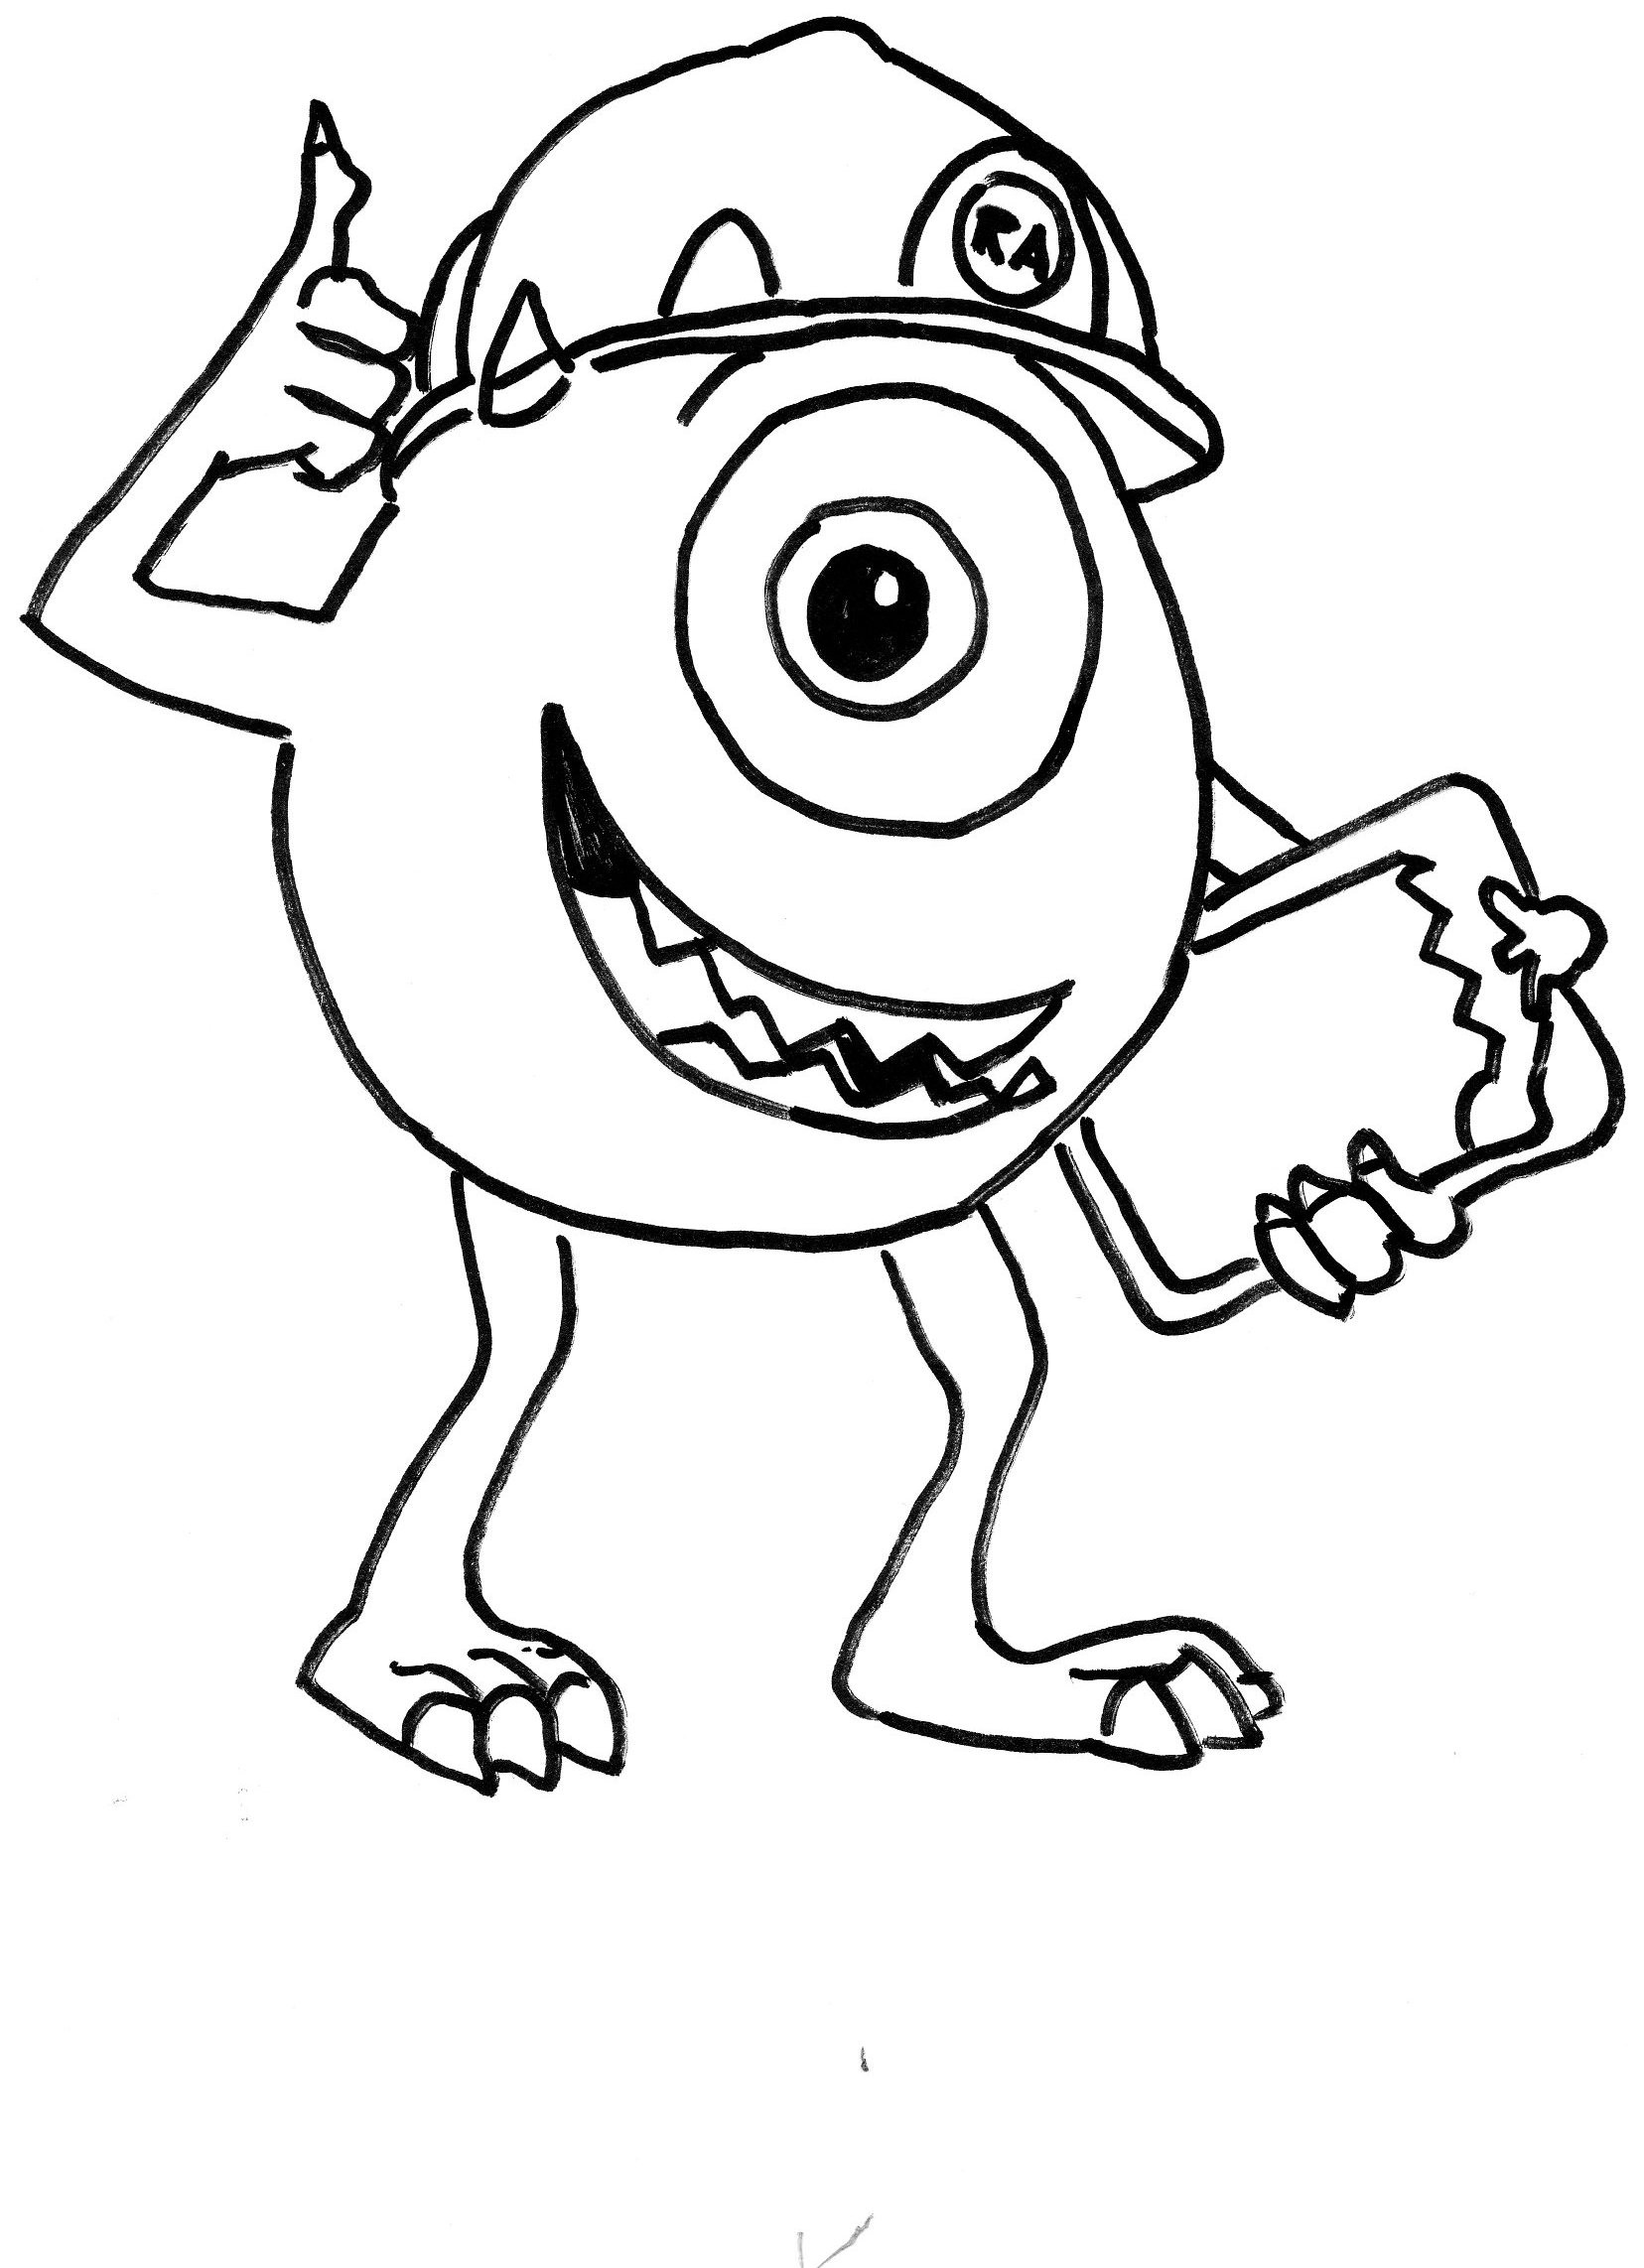 Printable Coloring Pages For Boys Soccre
 Coloring Pages for Boys 2018 Dr Odd